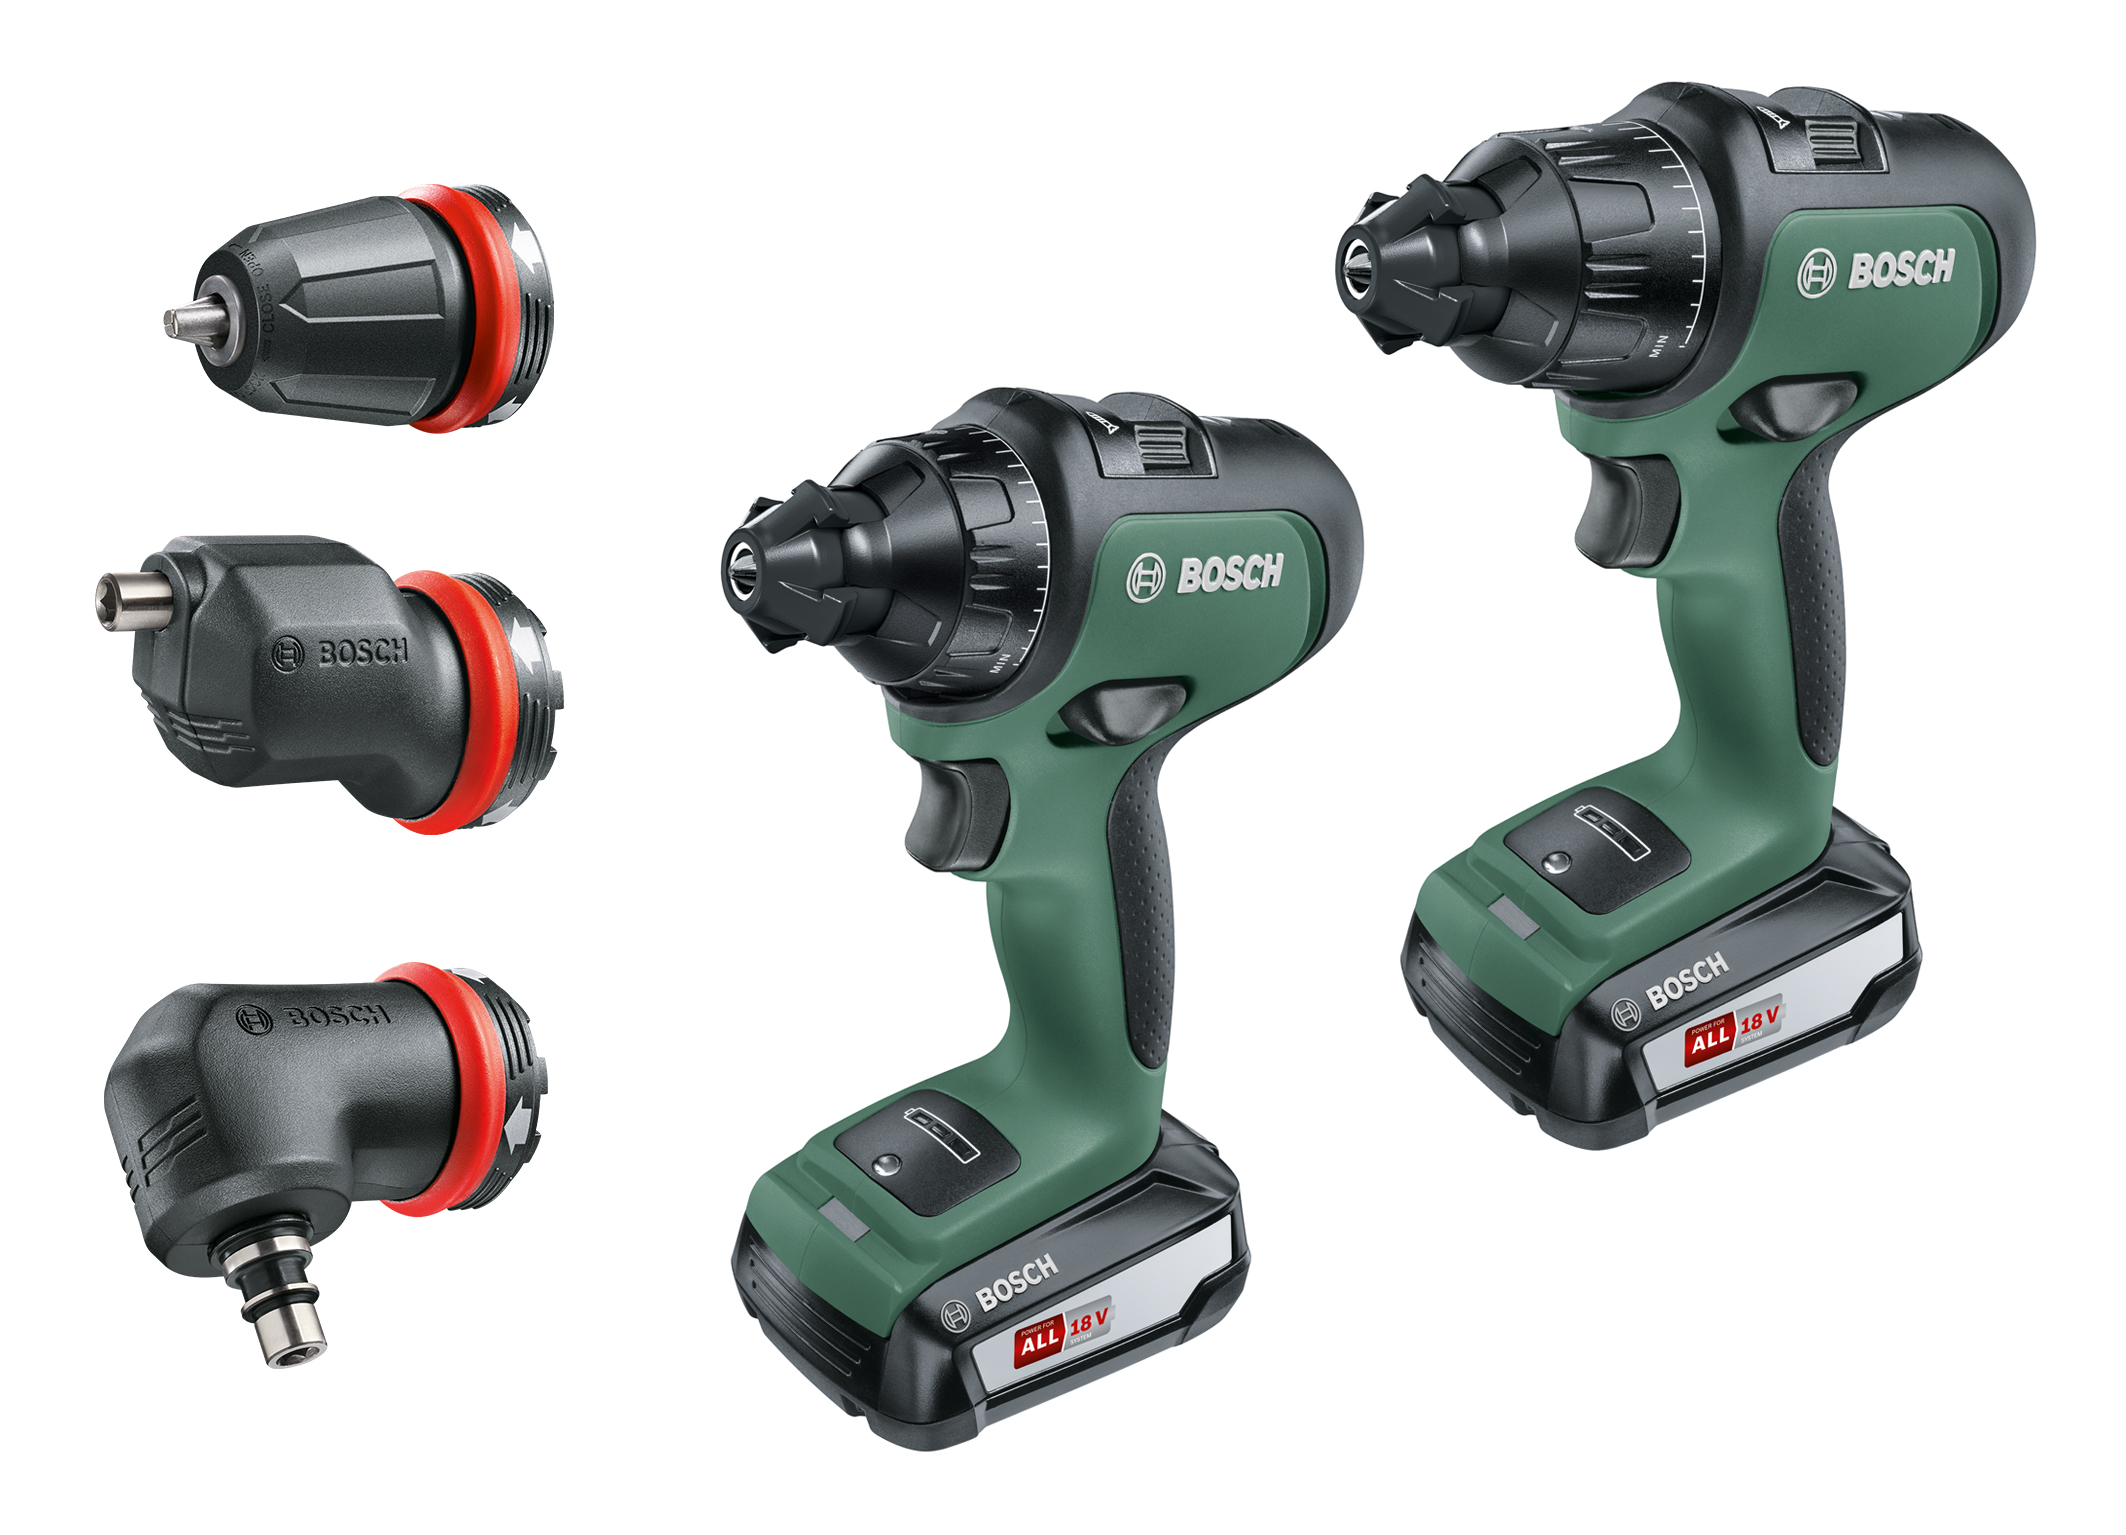 Cordless screwdrivers with intuitive operating concept: AdvancedDrill 18 and AdvancedImpact 18 from Bosch